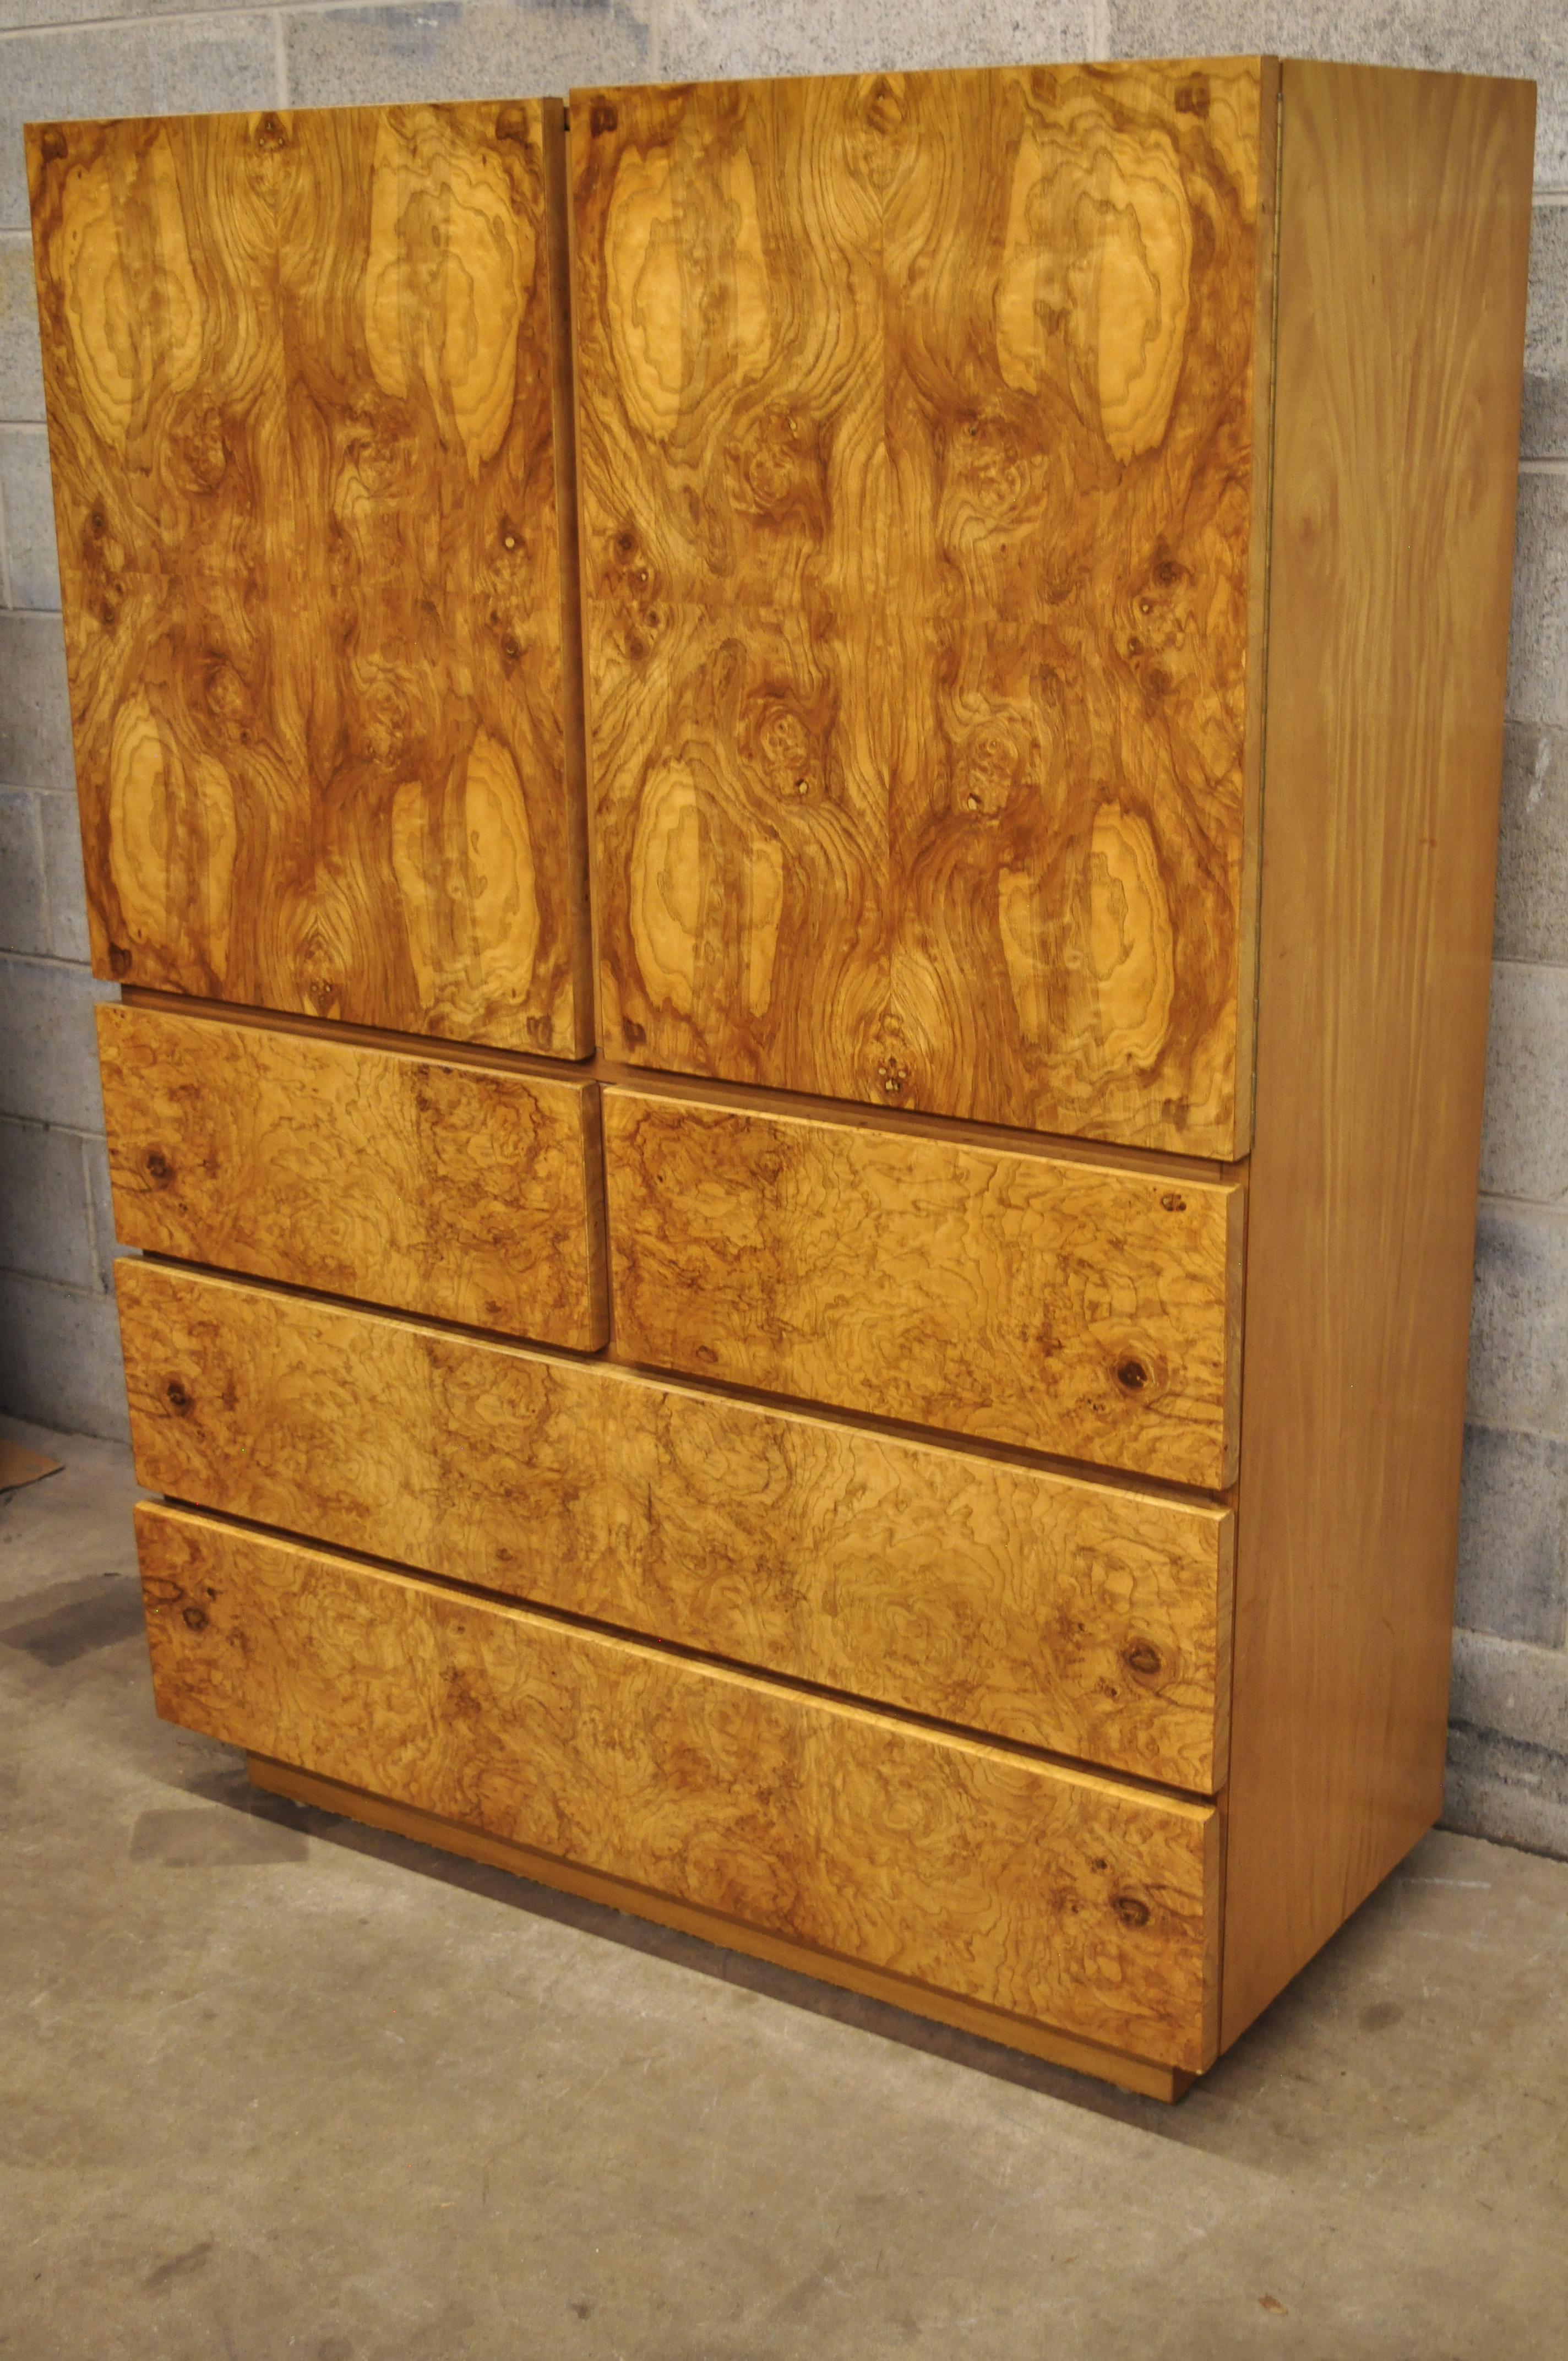 Mid-Century Modern Lane Art Deco burl wood Baughman style armoire chest dresser. Item features beautiful wood grain, 2 swing doors, original stamp, 5 dovetailed drawers, clean modernist lines, quality American craftsmanship, circa mid-20th century.